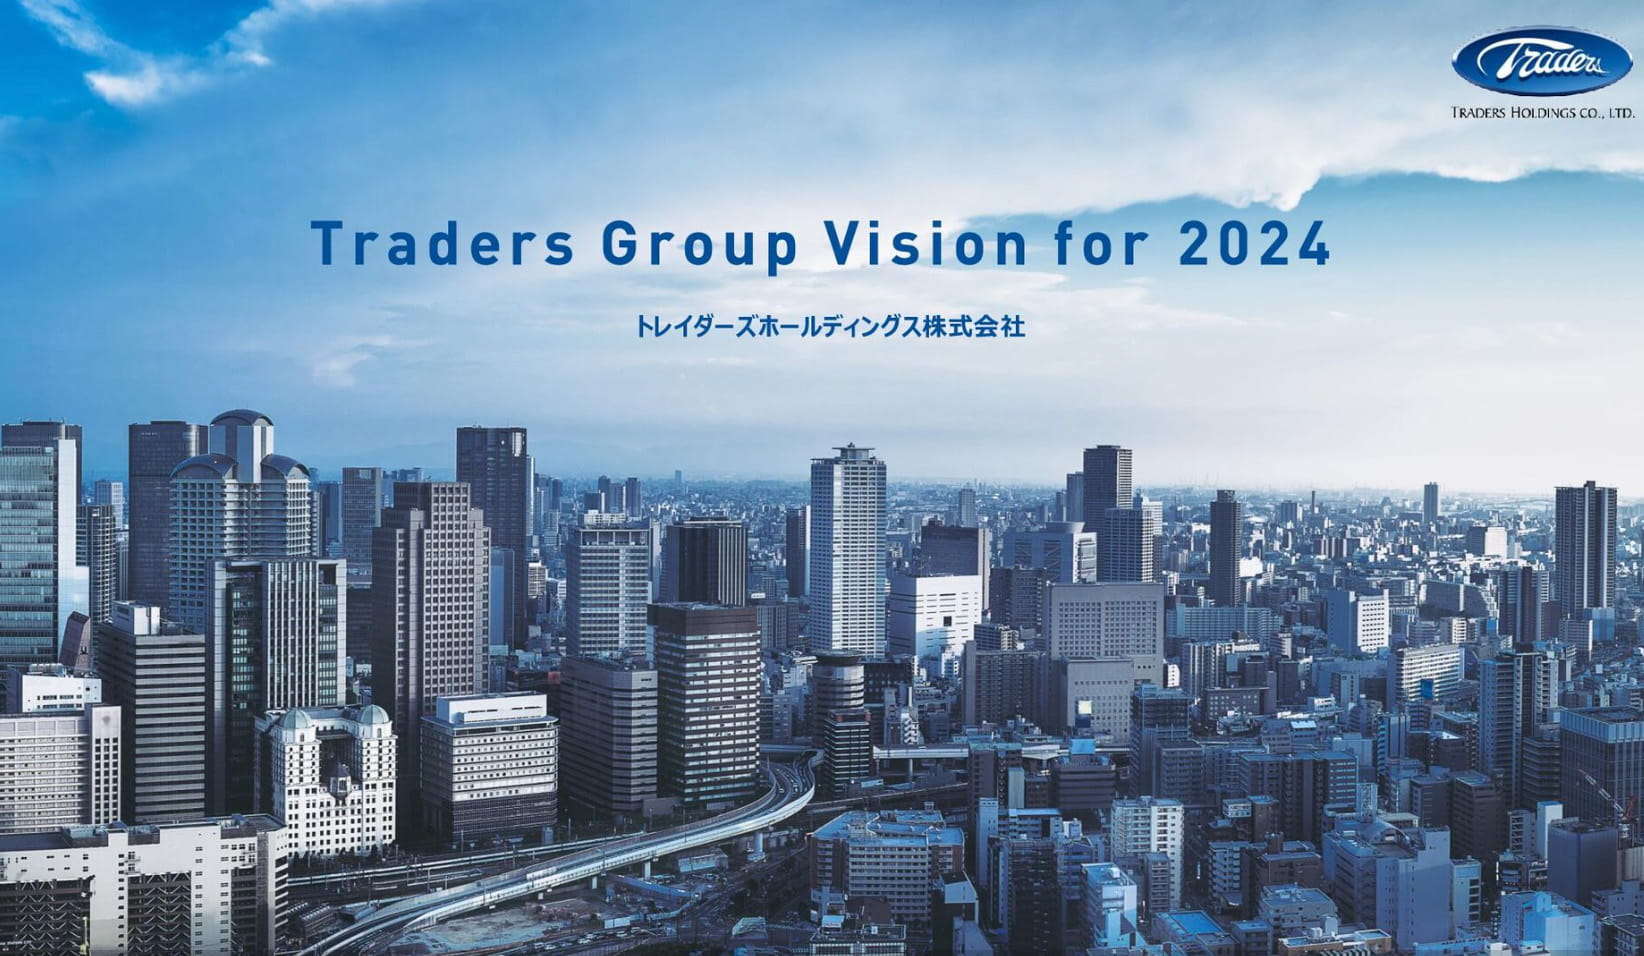 Traders Group Vision for 2024